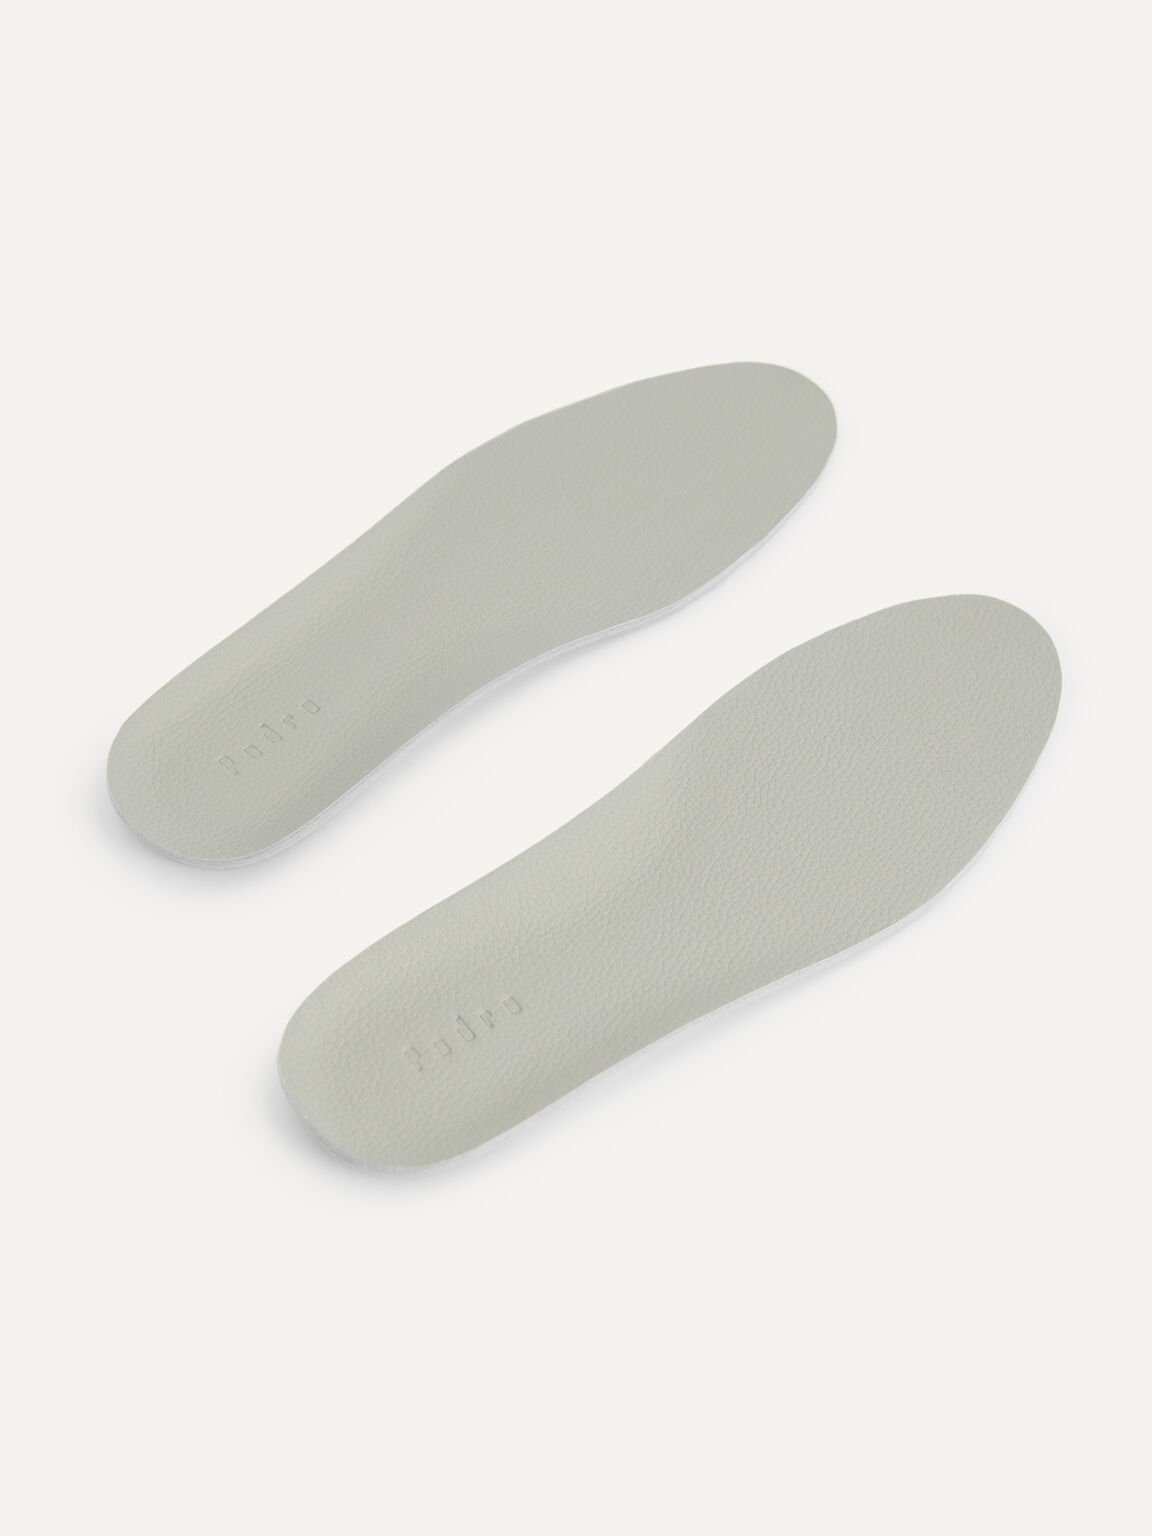 Sports Cushion Leather Insole, Light Grey